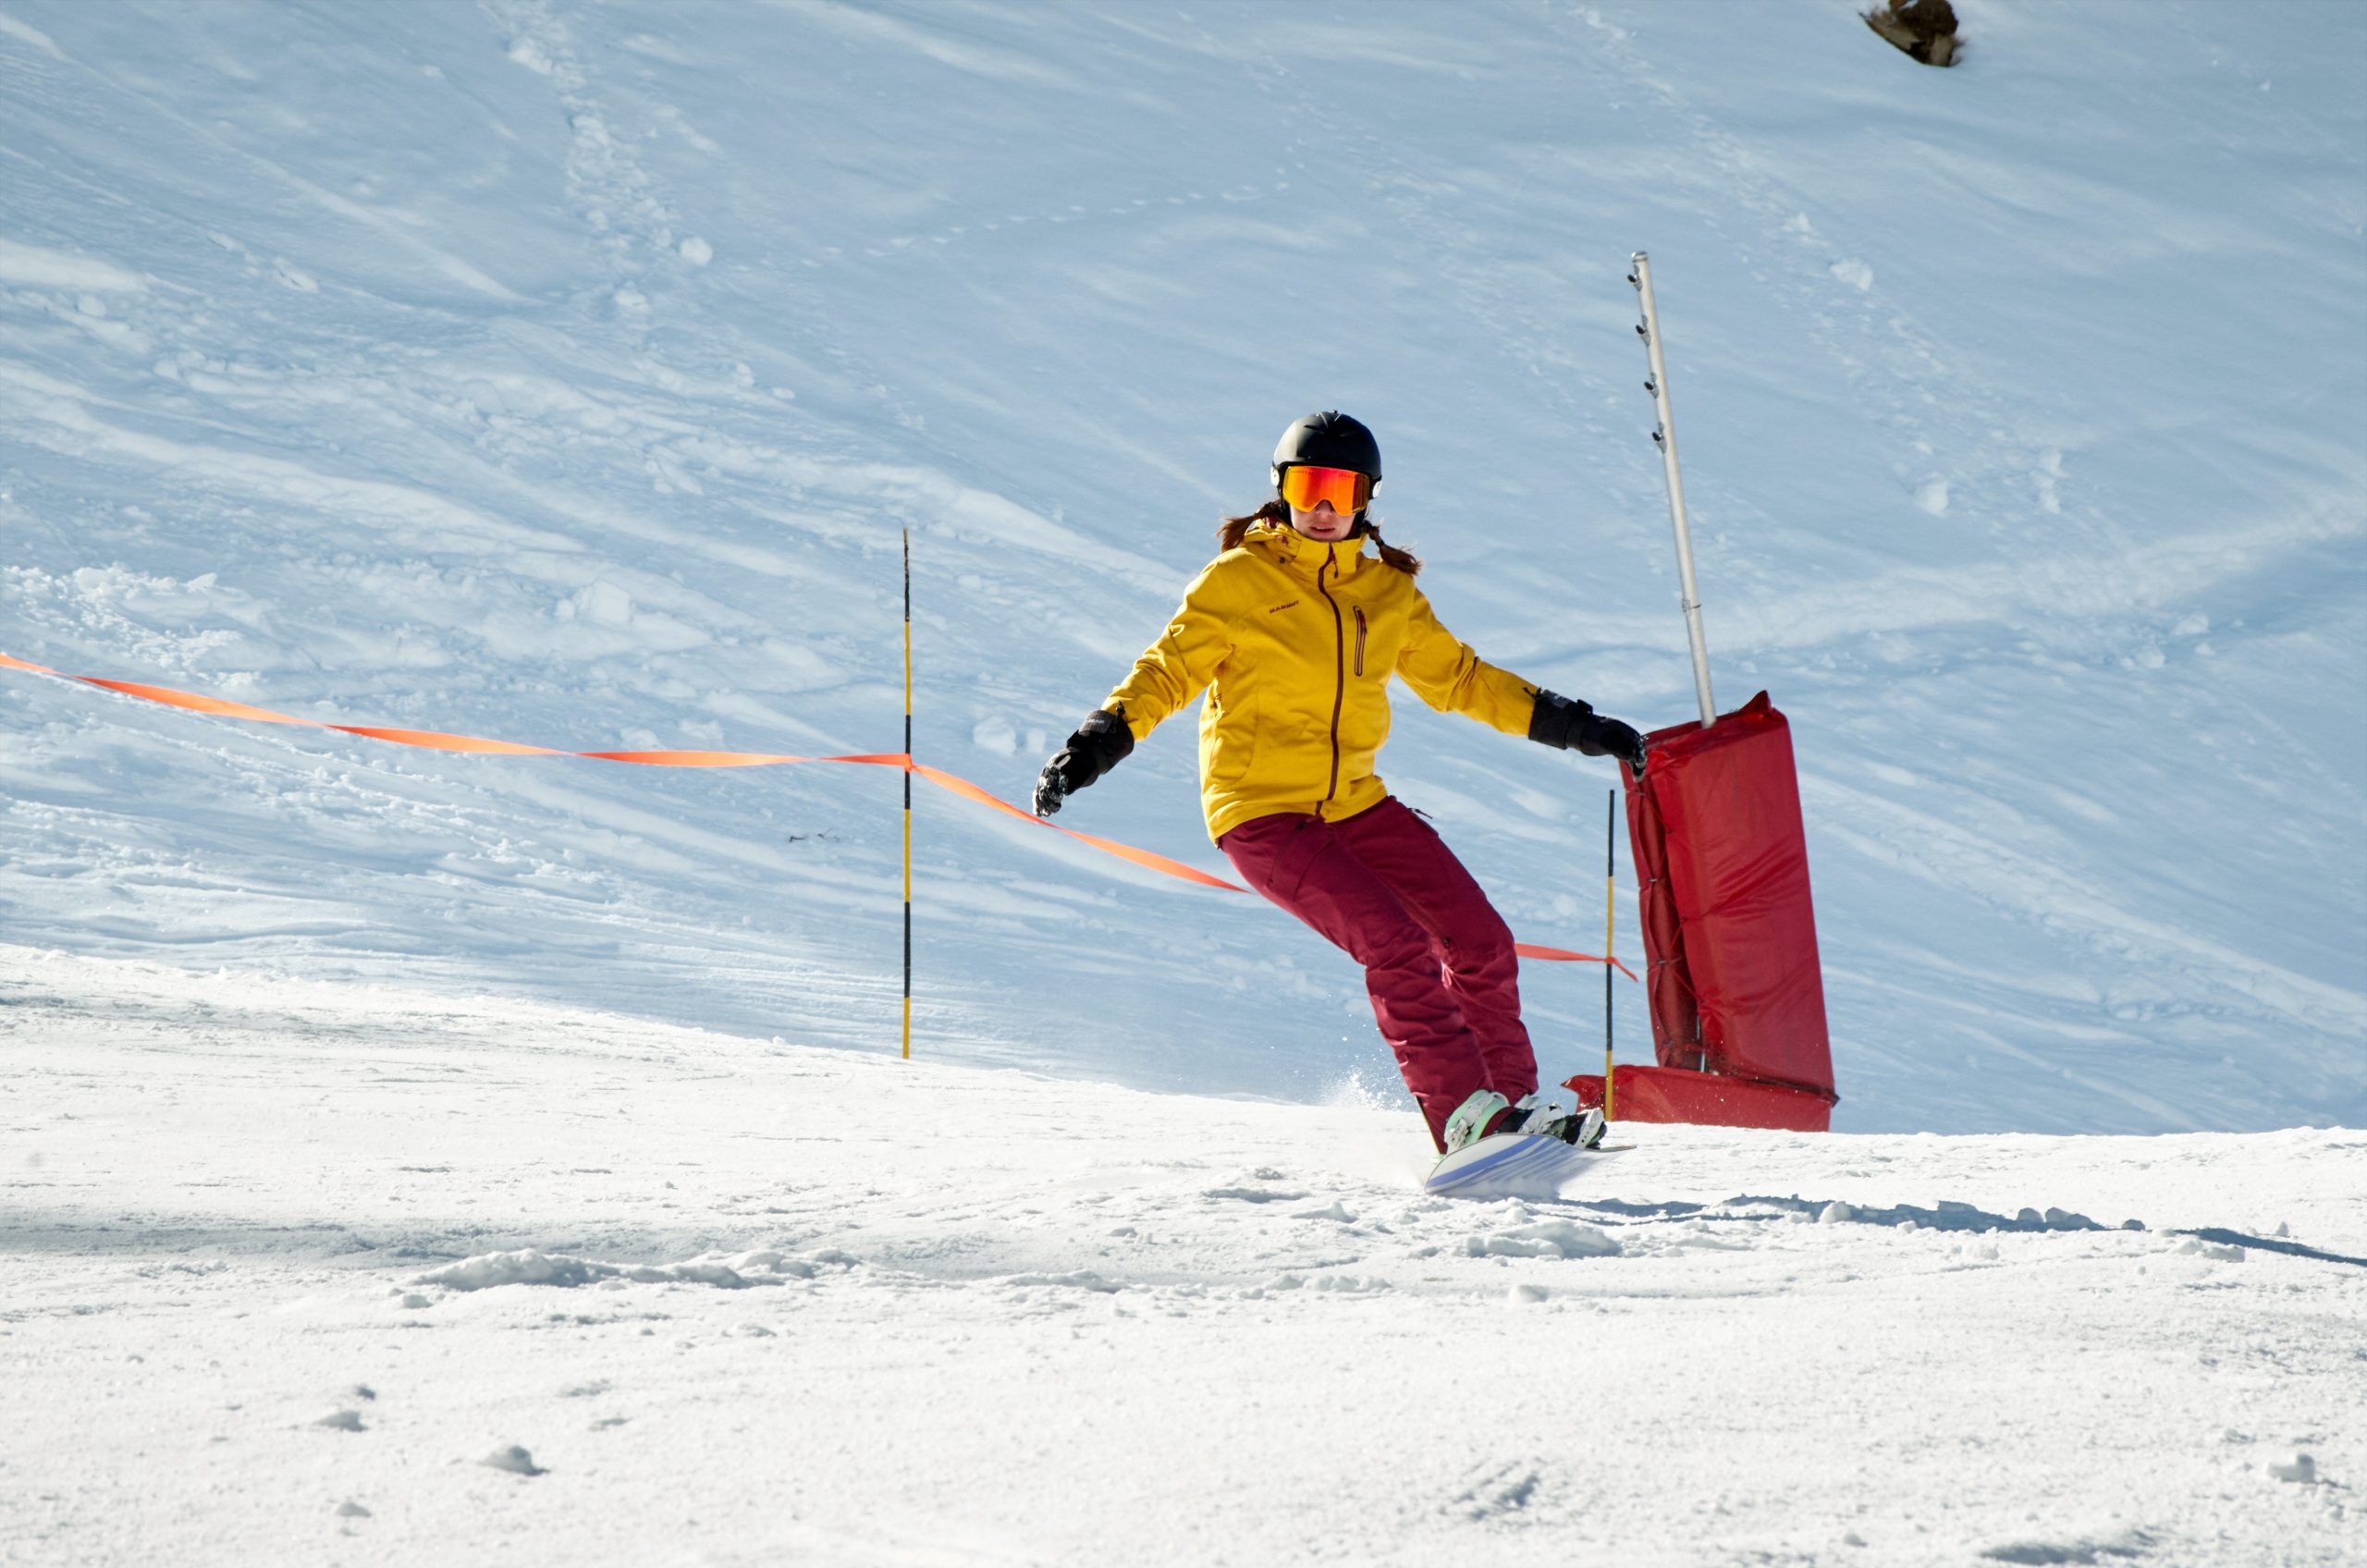 Private or Group Ski and Snowboard Lessons?